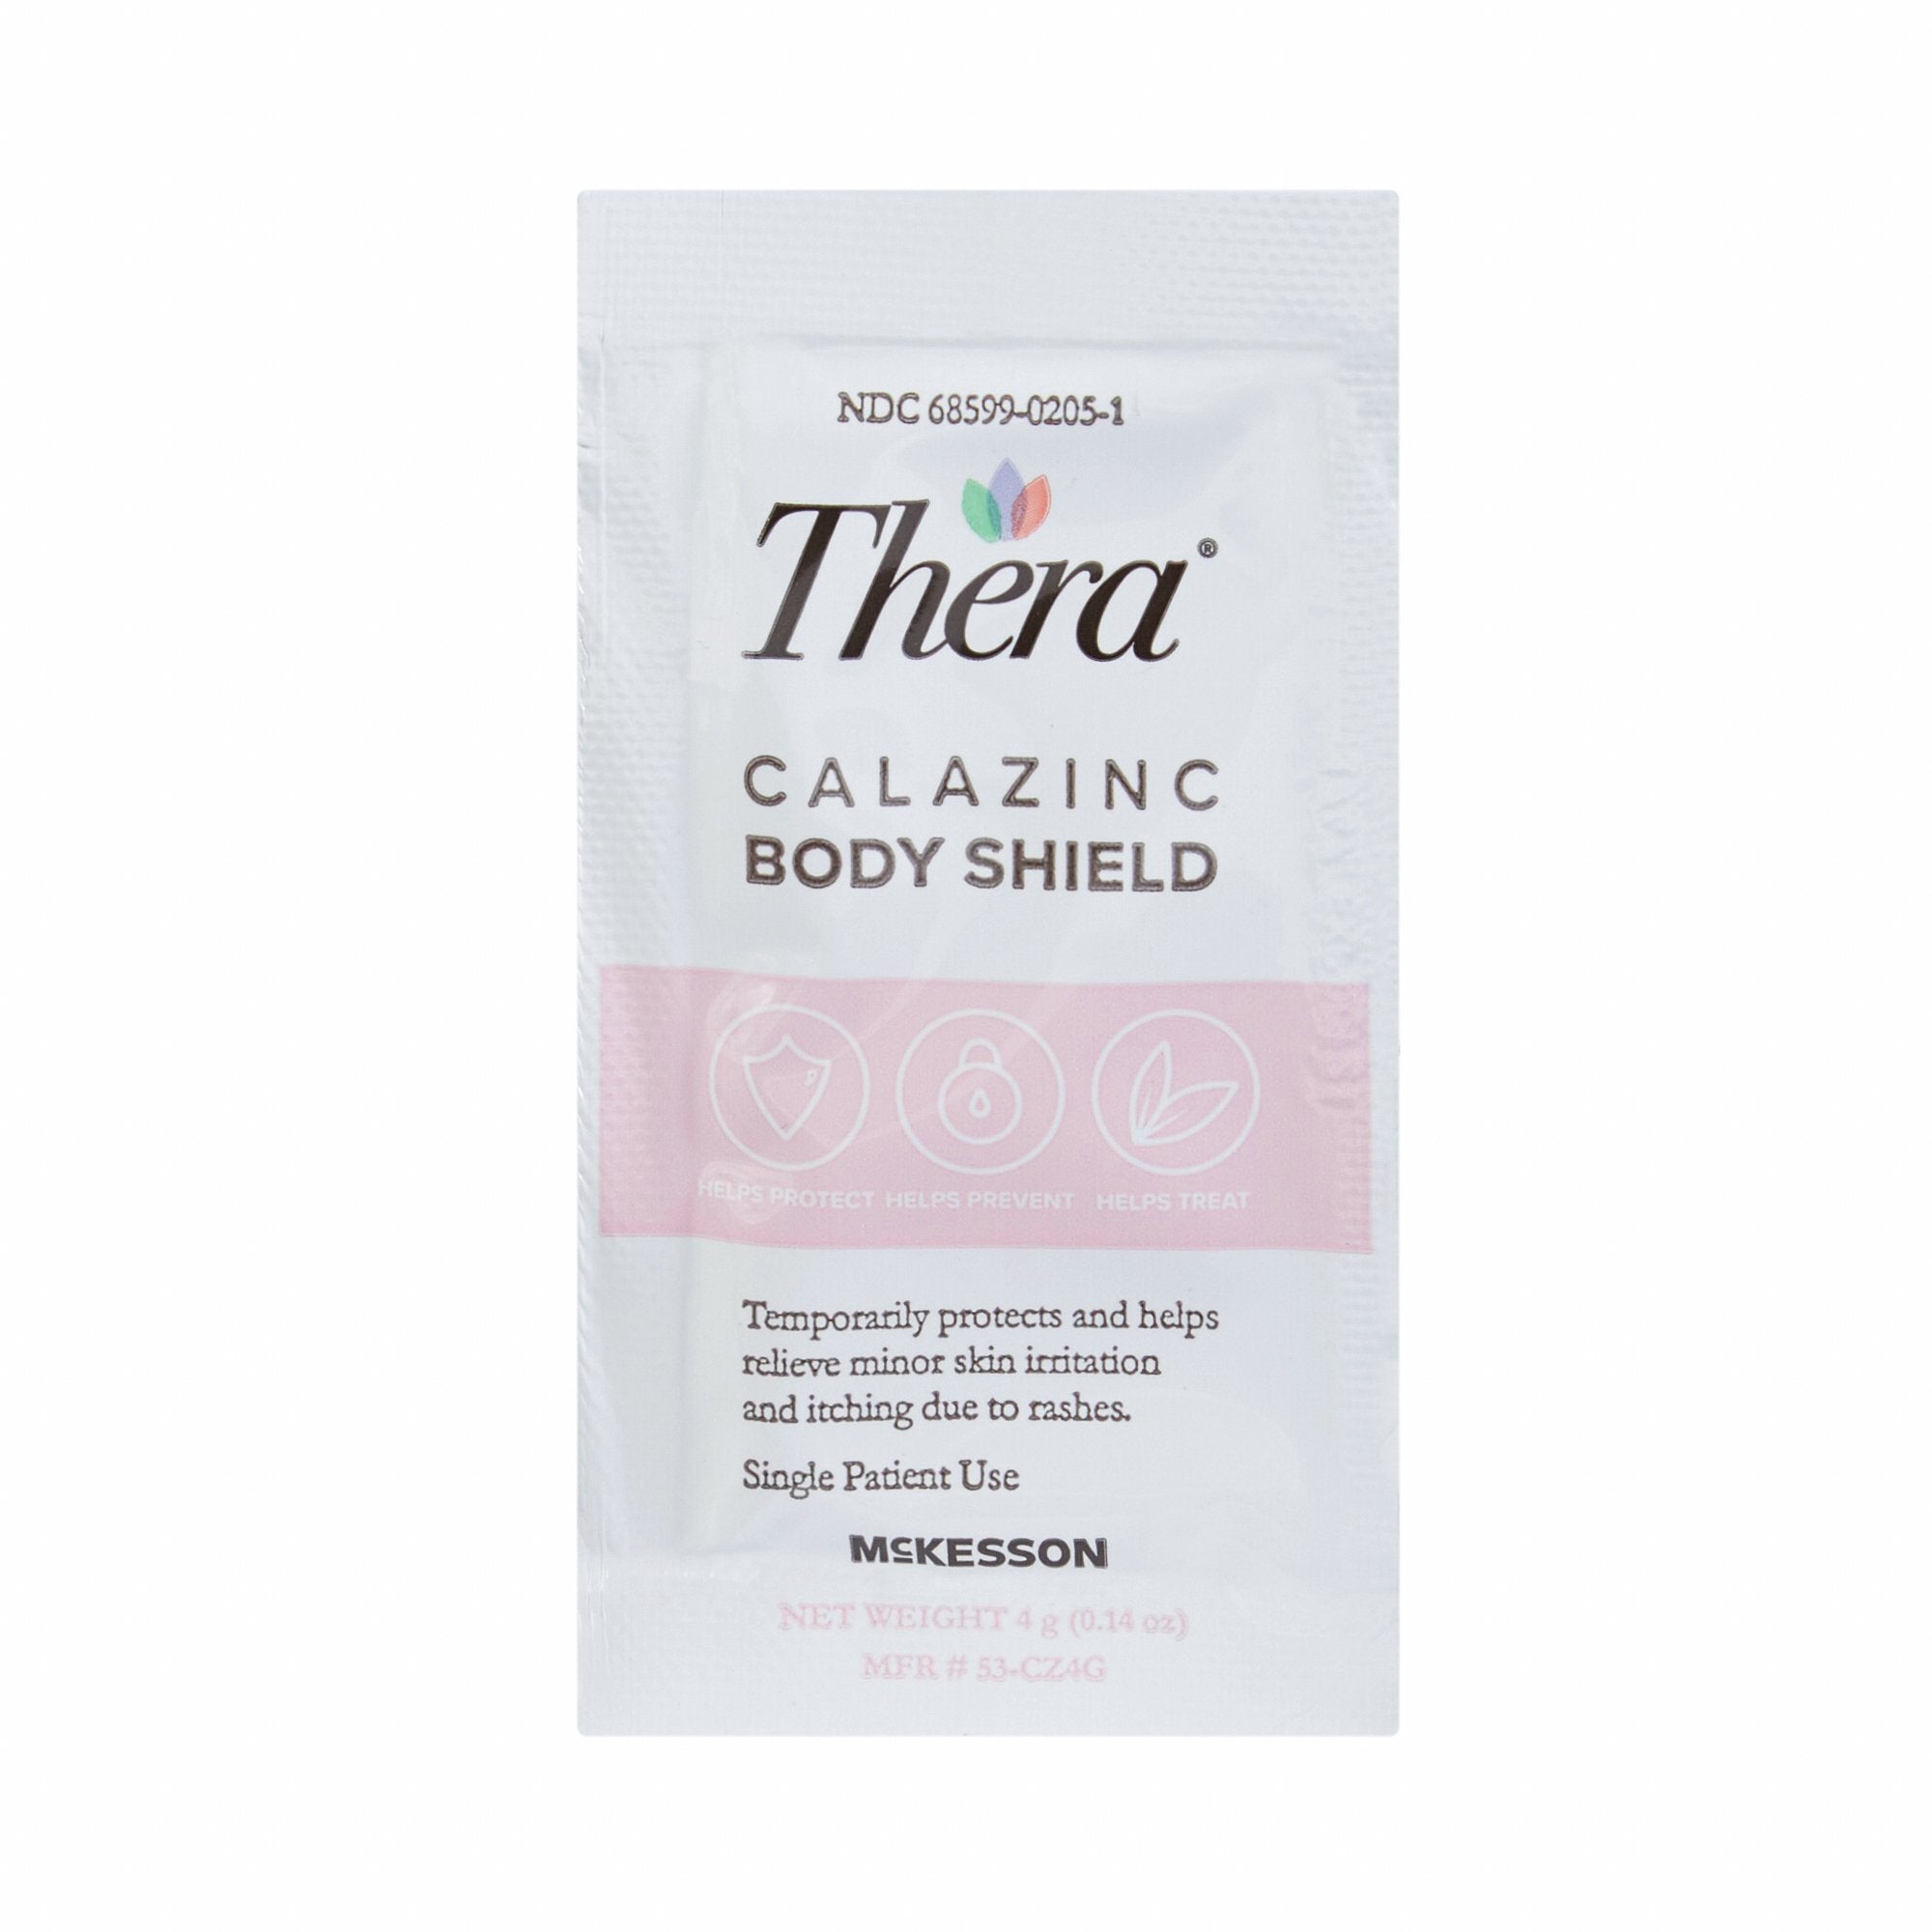 Skin Protectant Thera Calazinc Body Shield 4 Gram Individual Packet Scented Cream